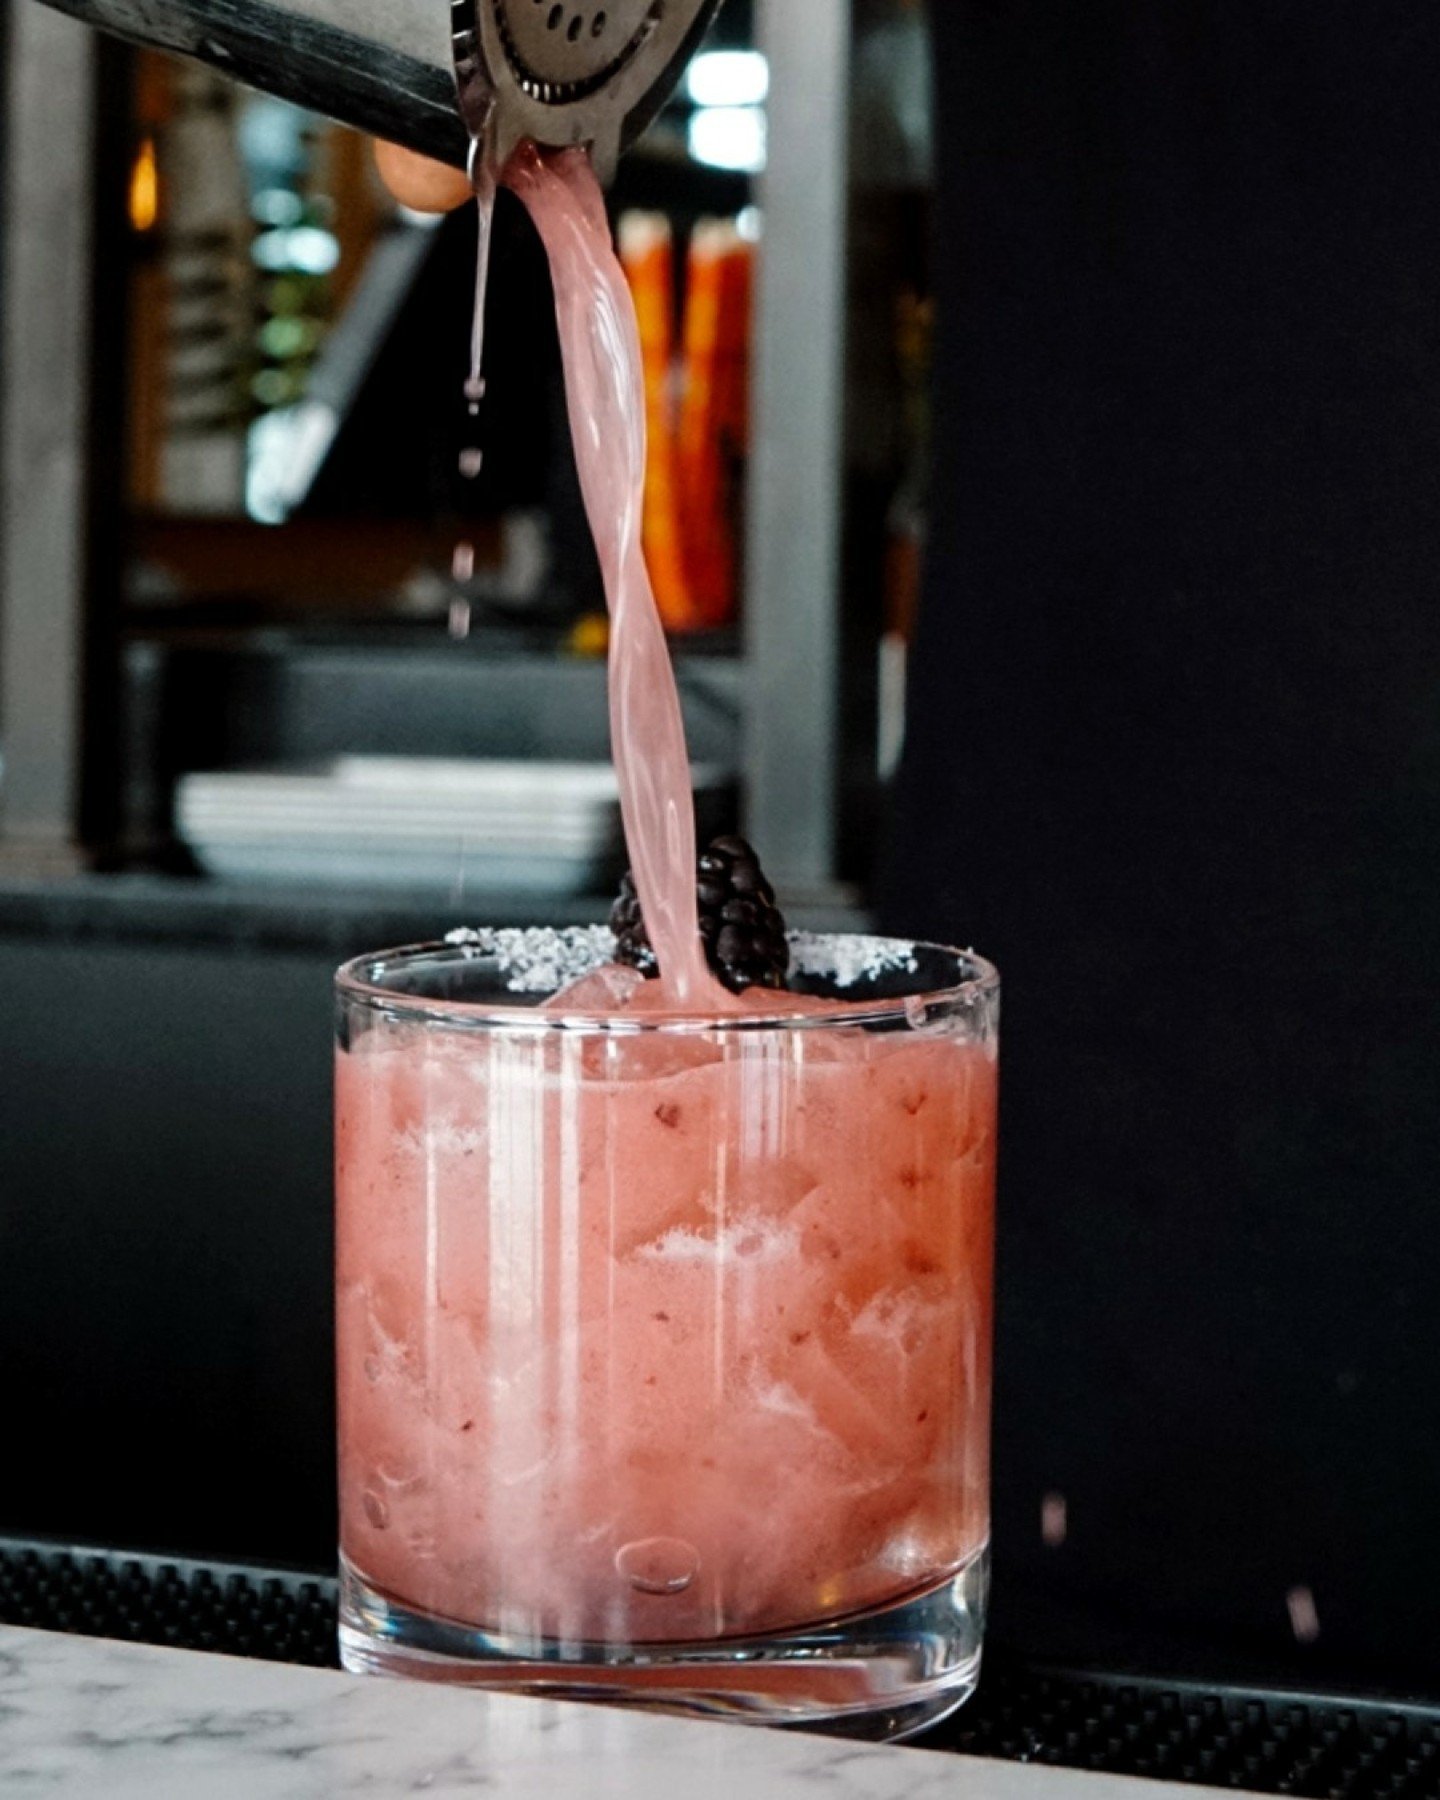 Pour it up, pour it up 😎

Tequila on a Friday only makes sense... sip on this drink menu favorite &ndash; TEQUILA MOCKINGBIRD 💥 Shaken with jalape&ntilde;o infused altos tequila, blackberry syrup, spicy agave, lime and soda water!

Get here tonight